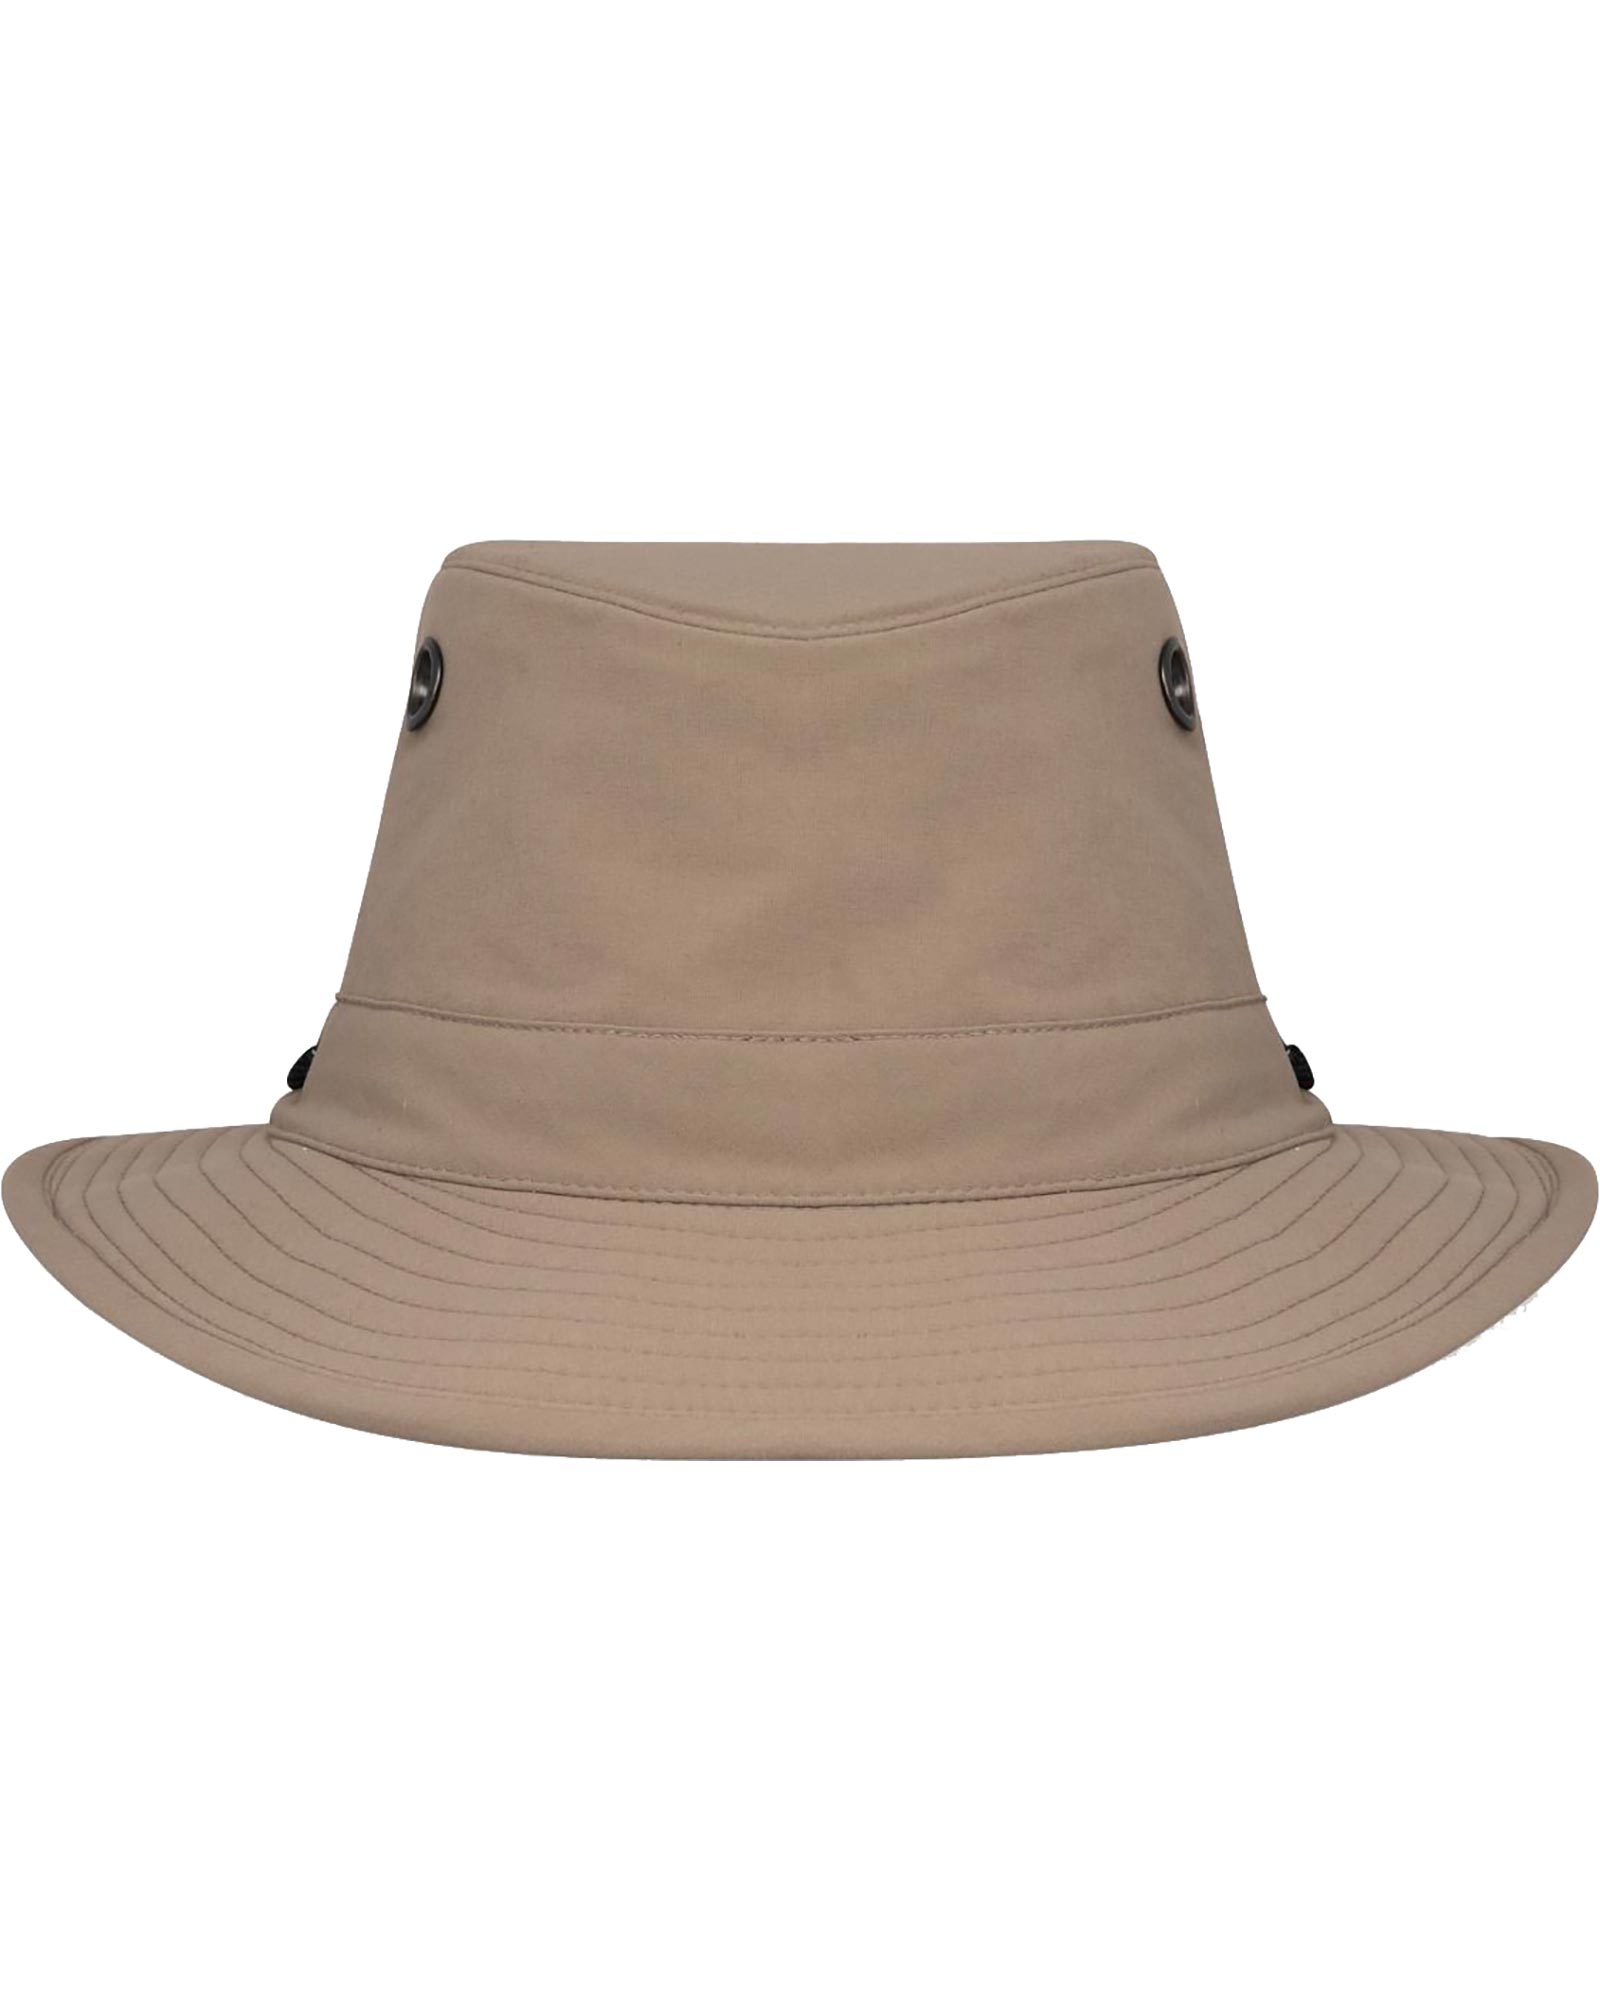 Tilley Breathable Bucket Hat - Taupe 7